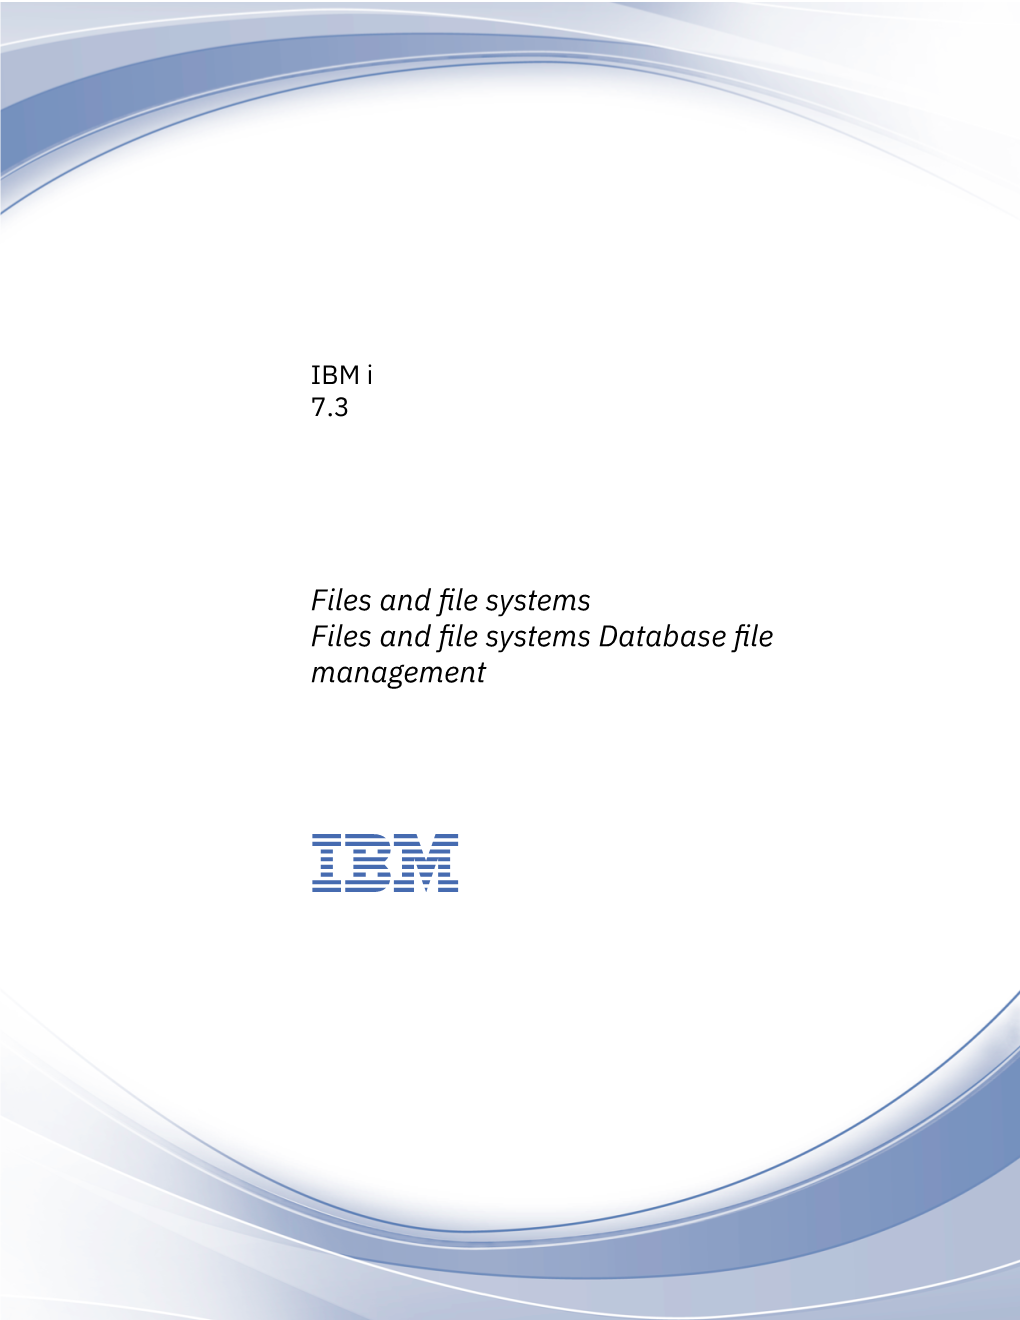 Files and File Systems Database File Management